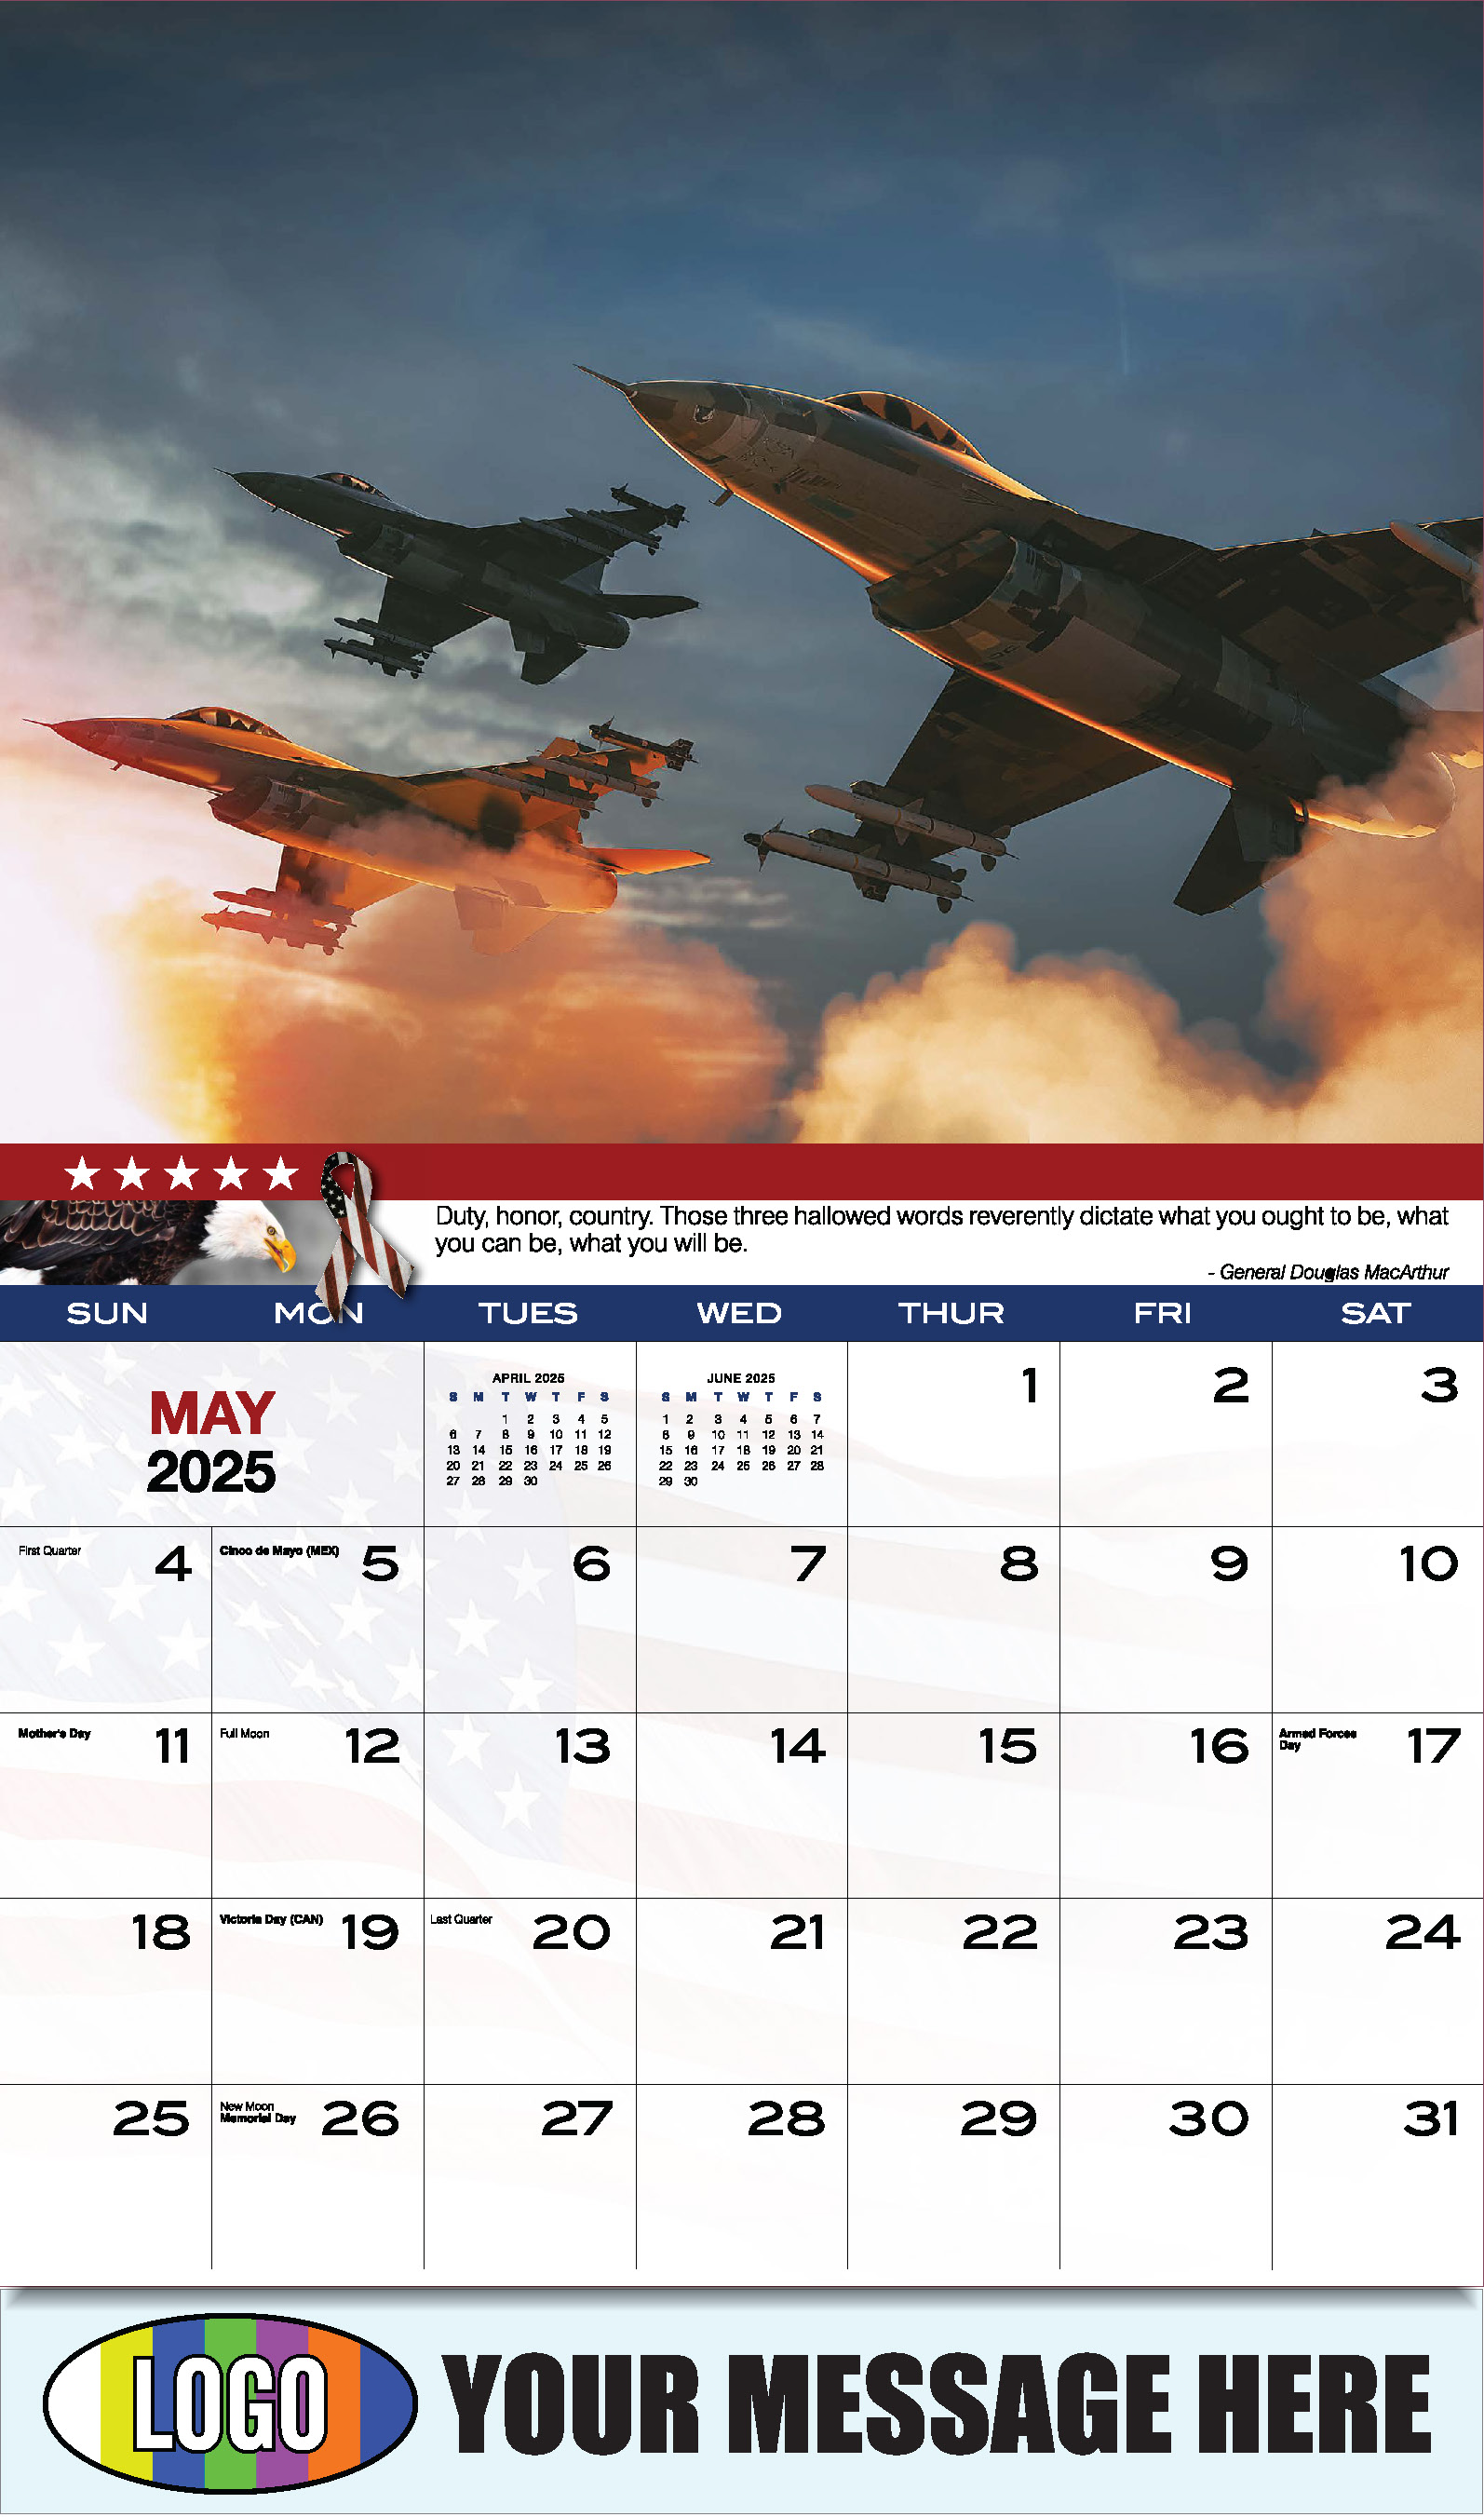 Home of the Brave 2025 USA Armed Forces Business Promo Calendar - May